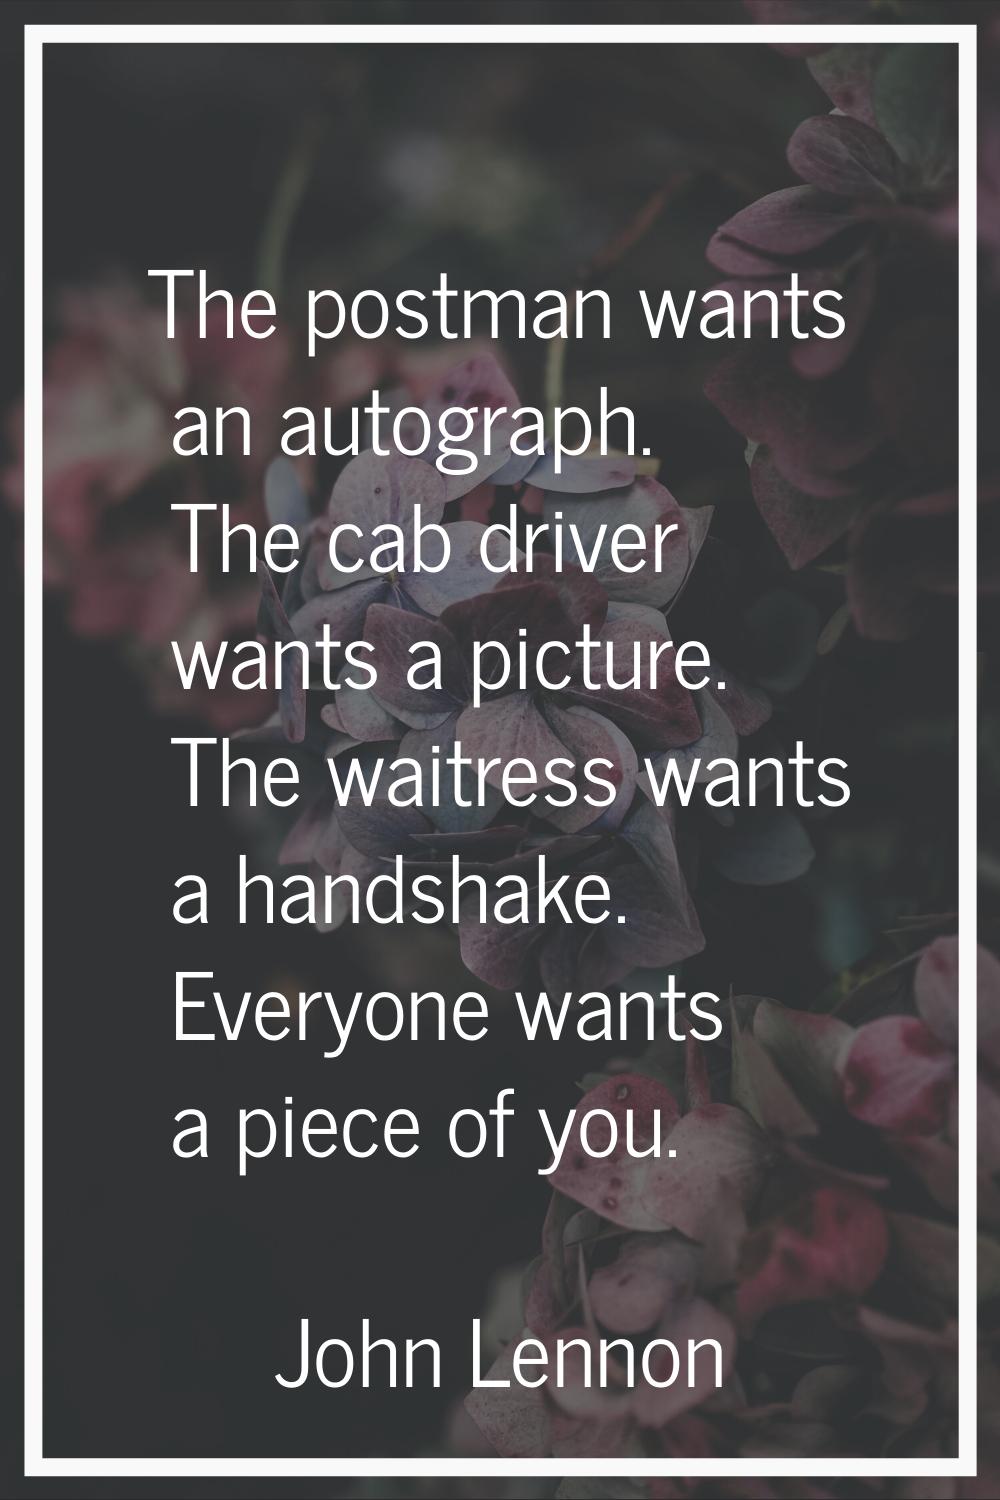 The postman wants an autograph. The cab driver wants a picture. The waitress wants a handshake. Eve